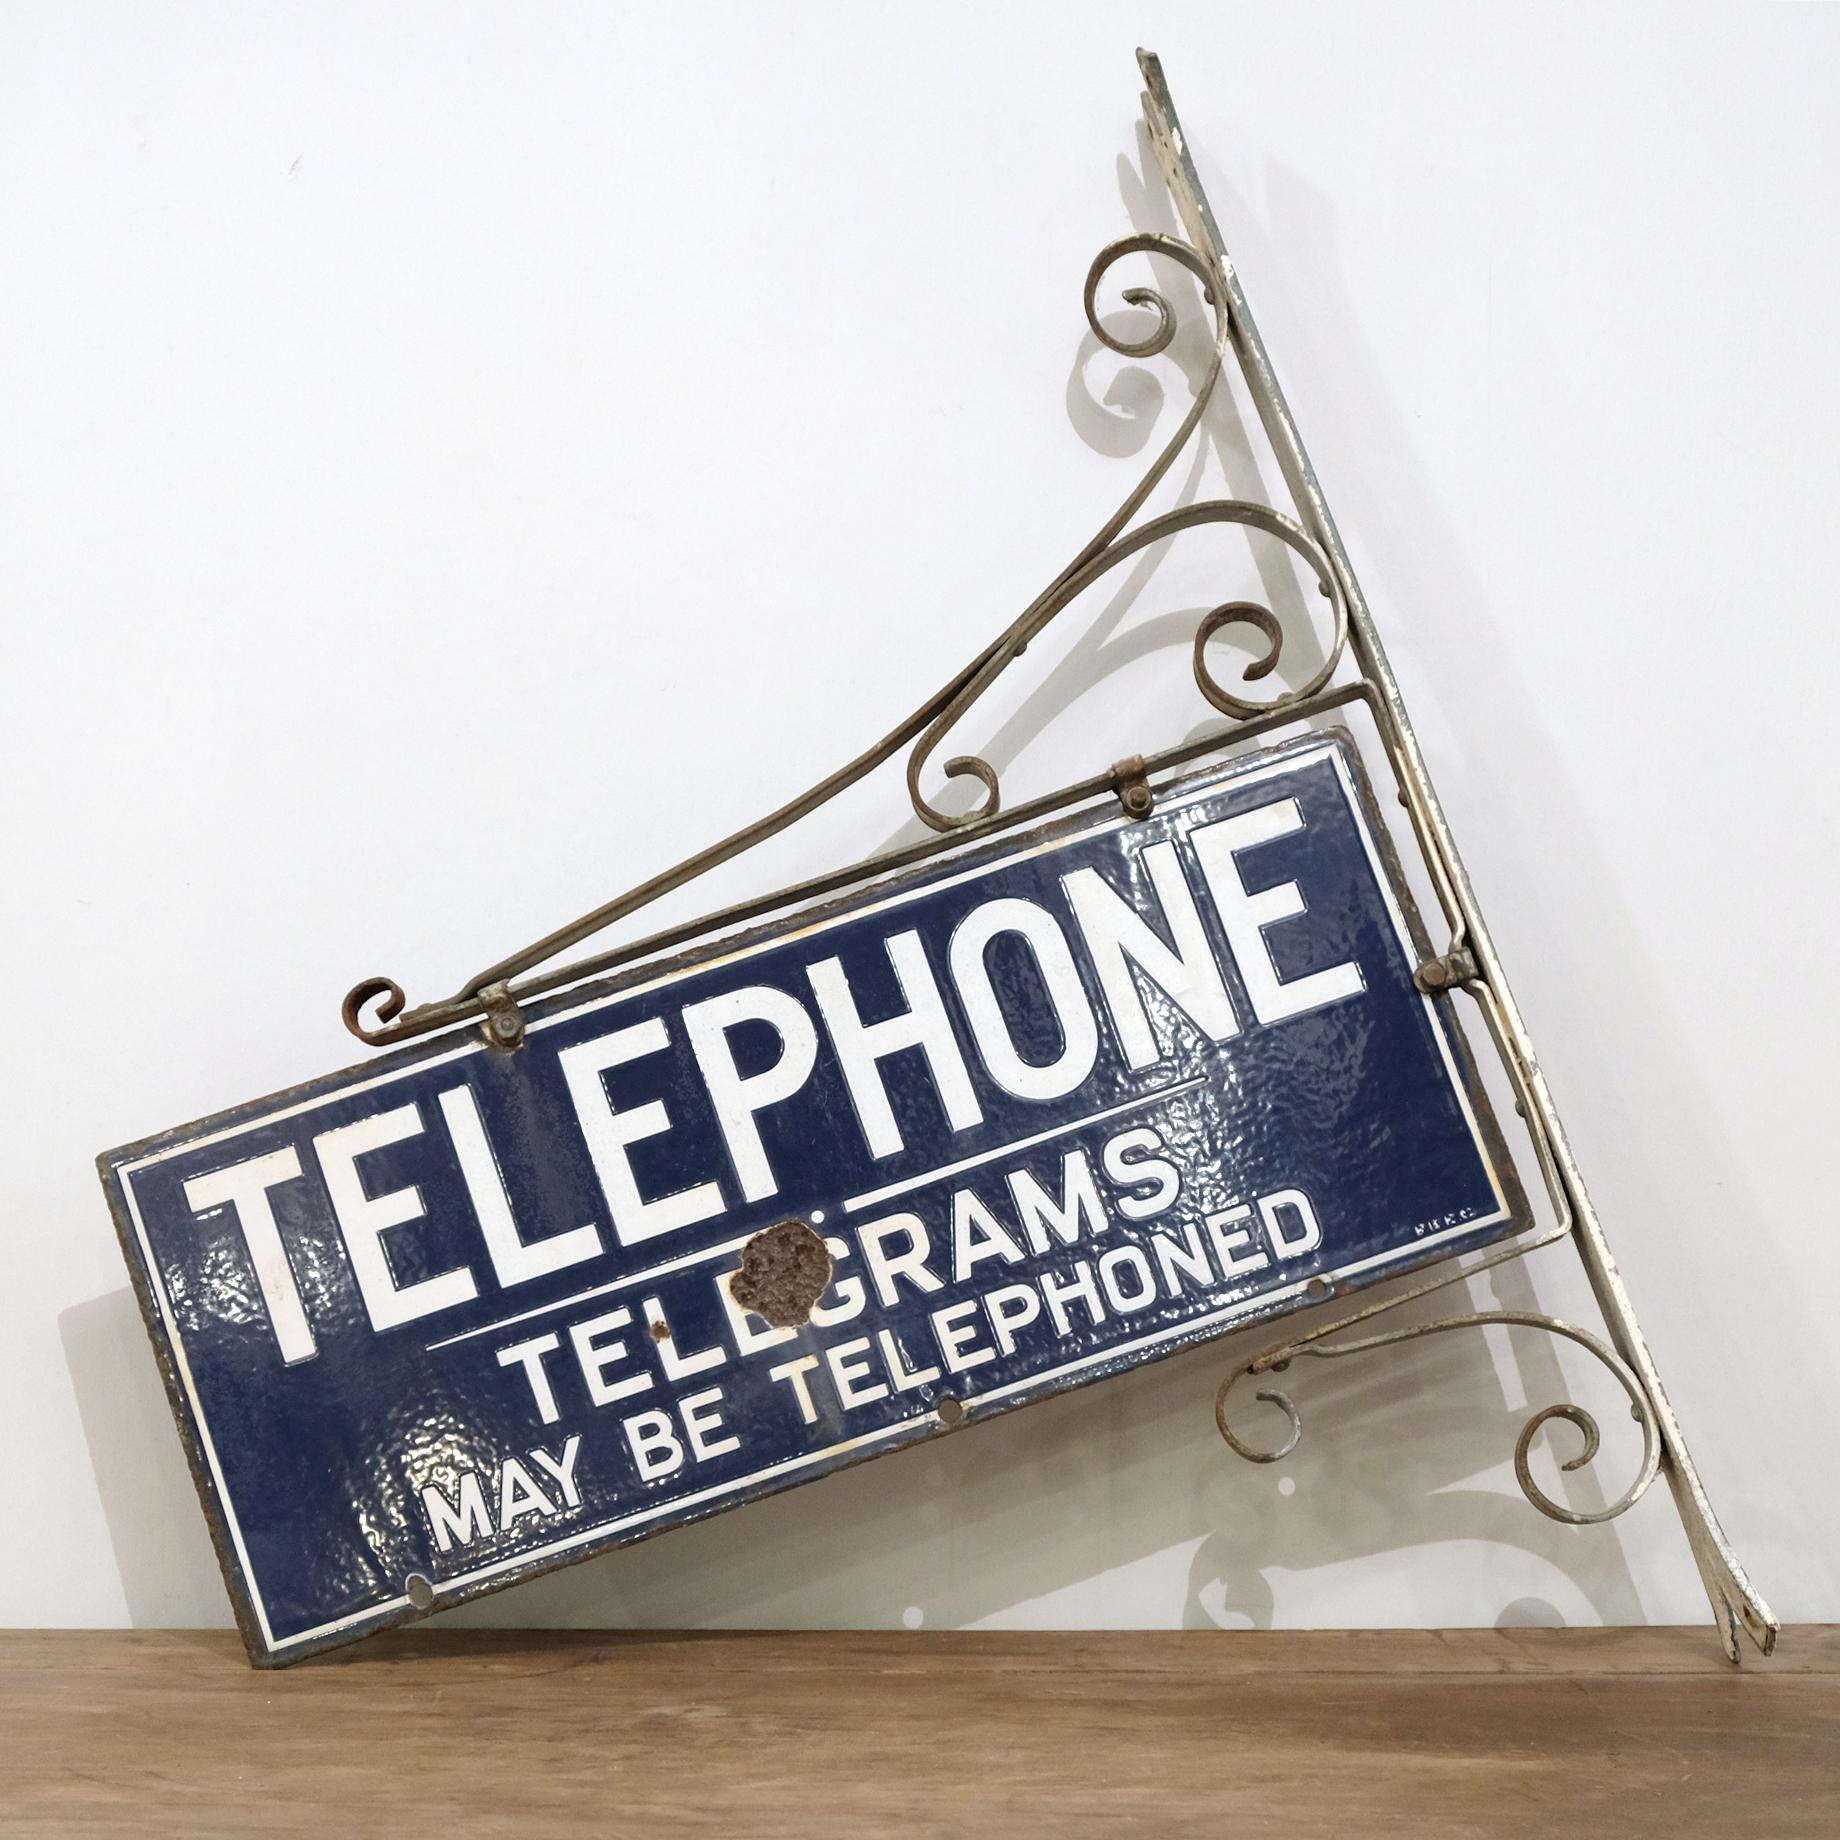 Original circa 1930s double-sided enamel sign which would have been displayed outside a post office or telephone box. This is a slightly more unusual example as it also informs that telegrams can be sent using the telephone. On original wrought